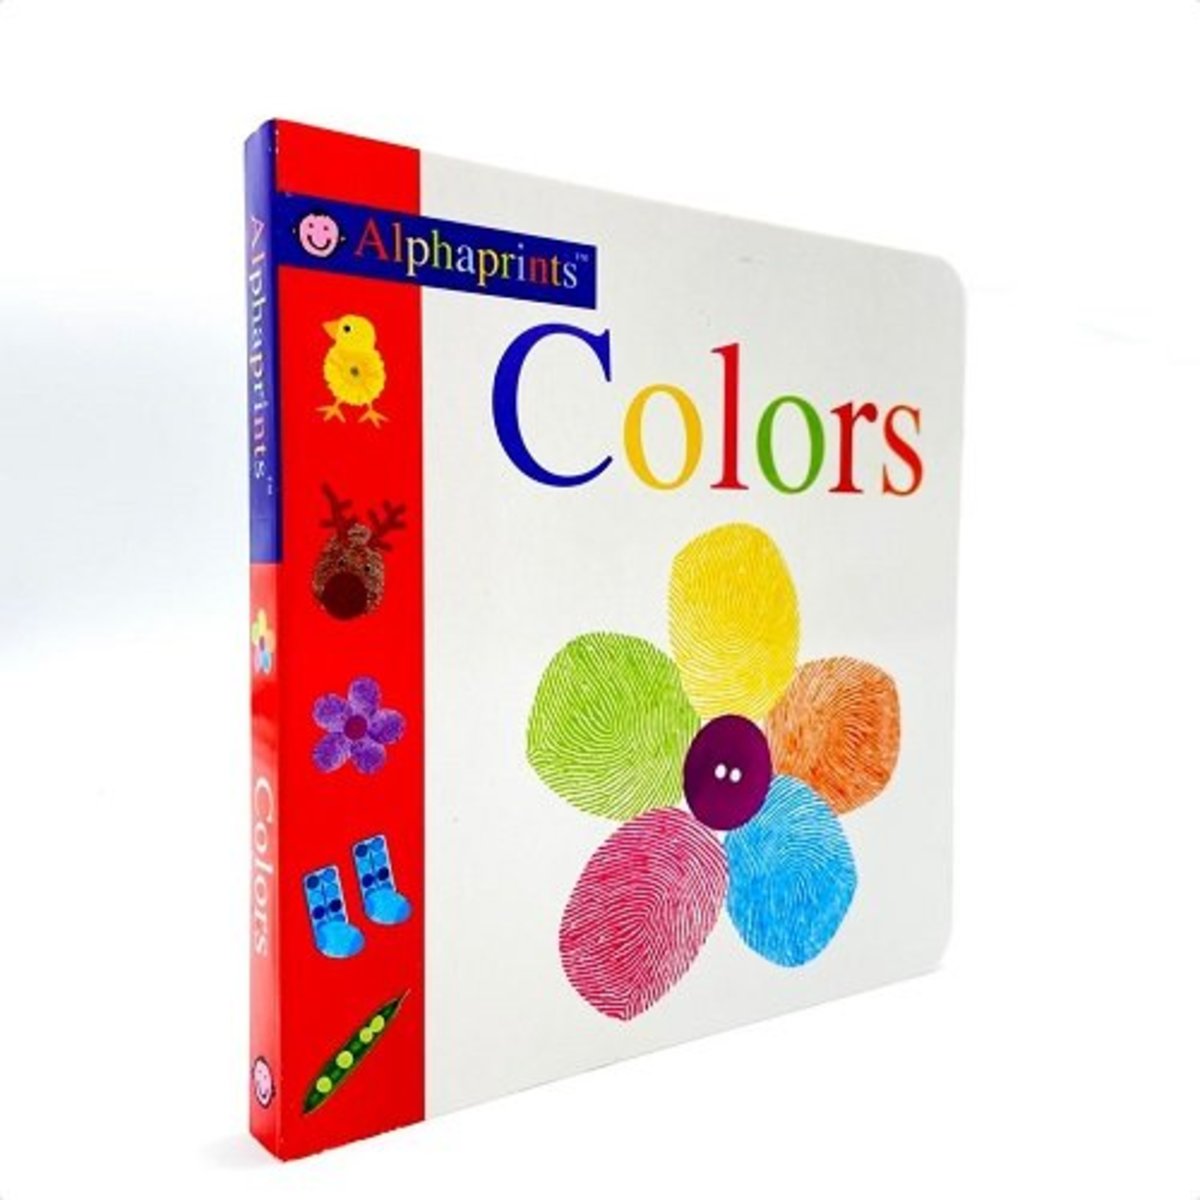 Priddy Books Alphaprints Colors Touchy Feely Board Book Alphaprints Colors 觸摸紙板書